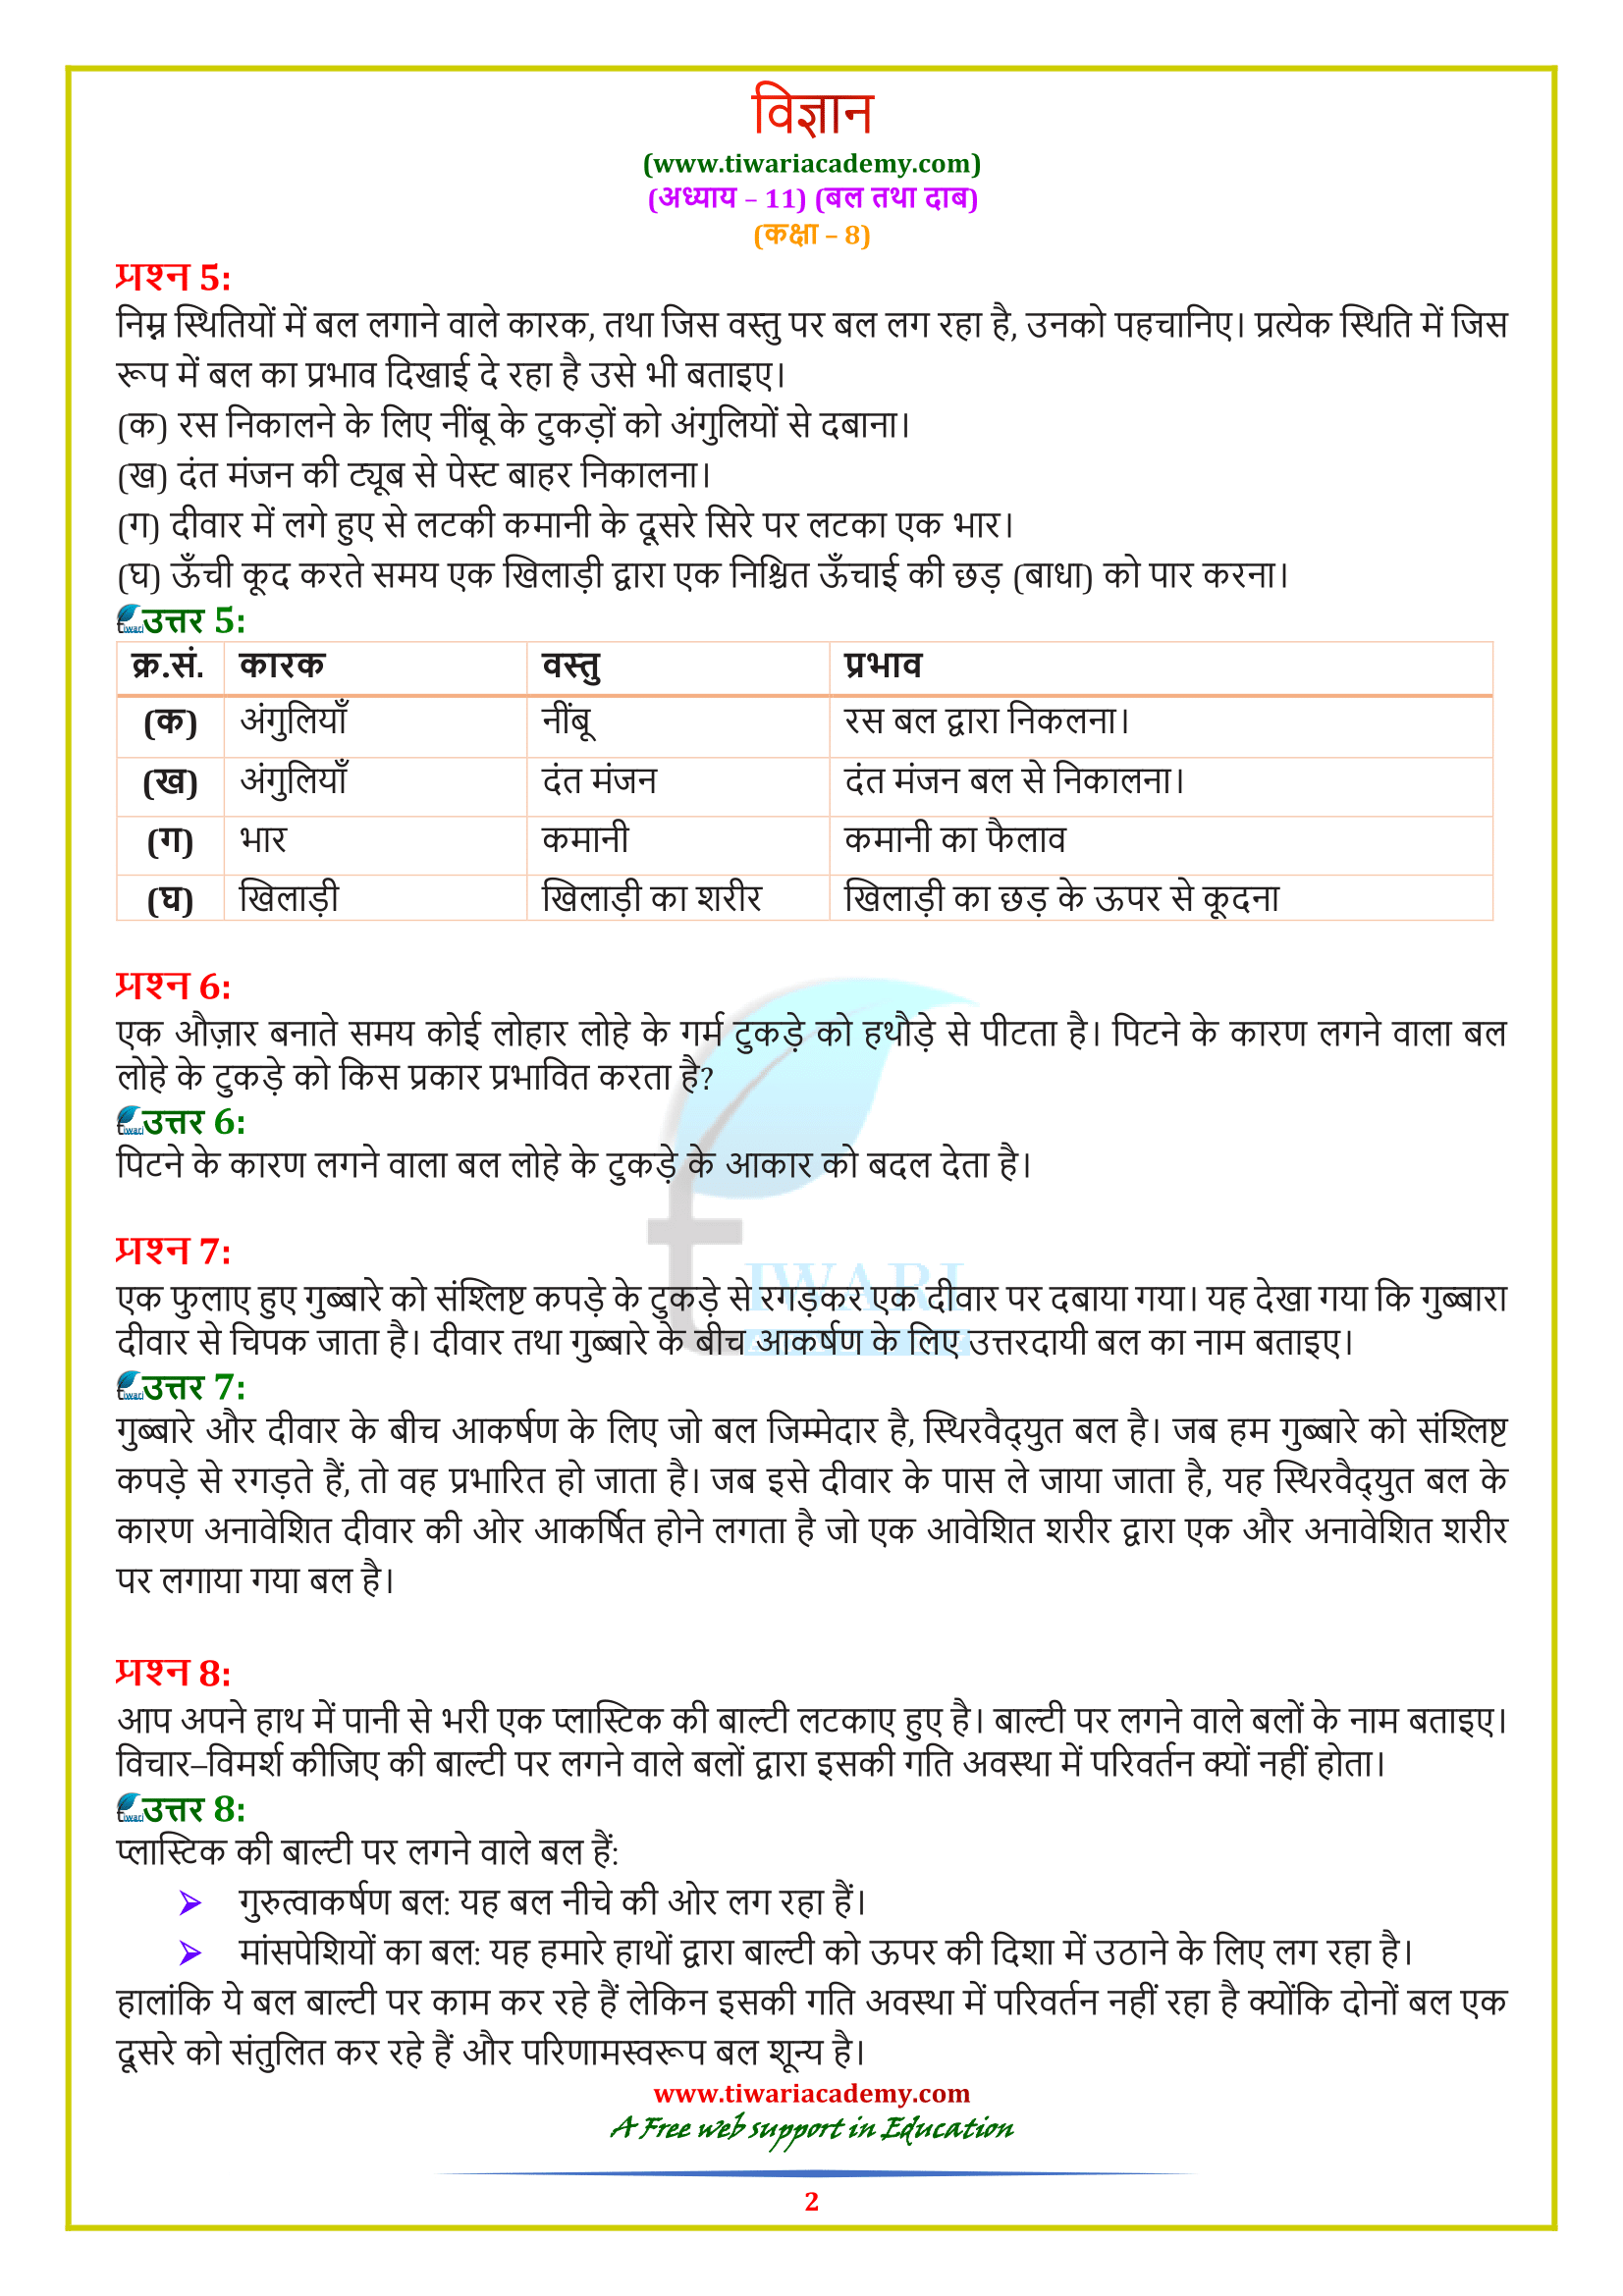 NCERT Solutions for Class 8 Science Chapter 11 in Hindi Medium